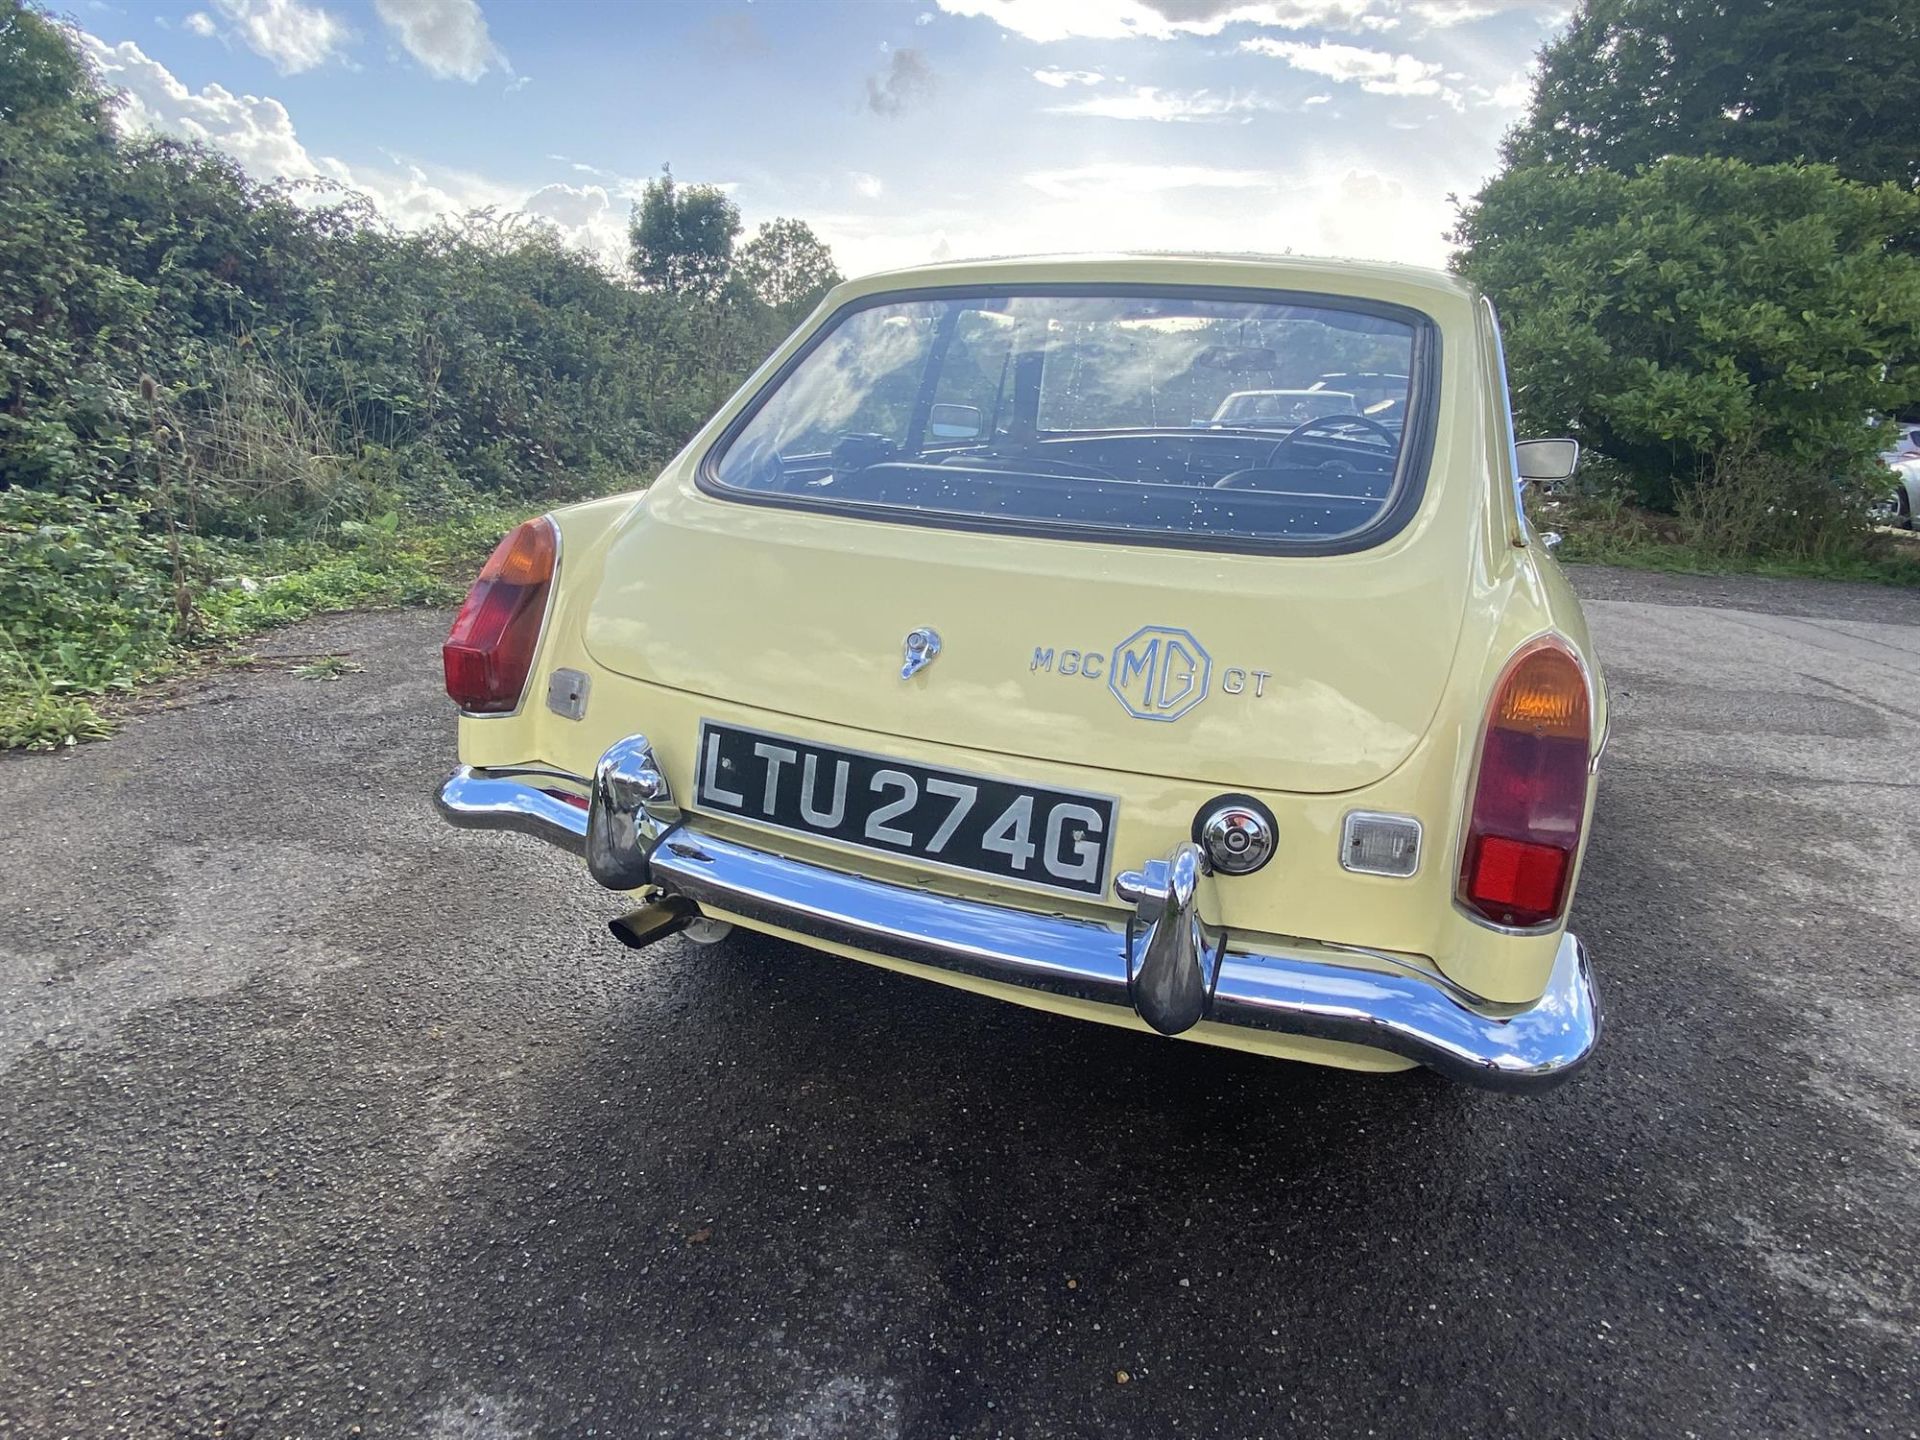 1969 MGC GT. Registration number: LTU 274G - Finished in Primrose yellow, with full black leather - Image 13 of 22